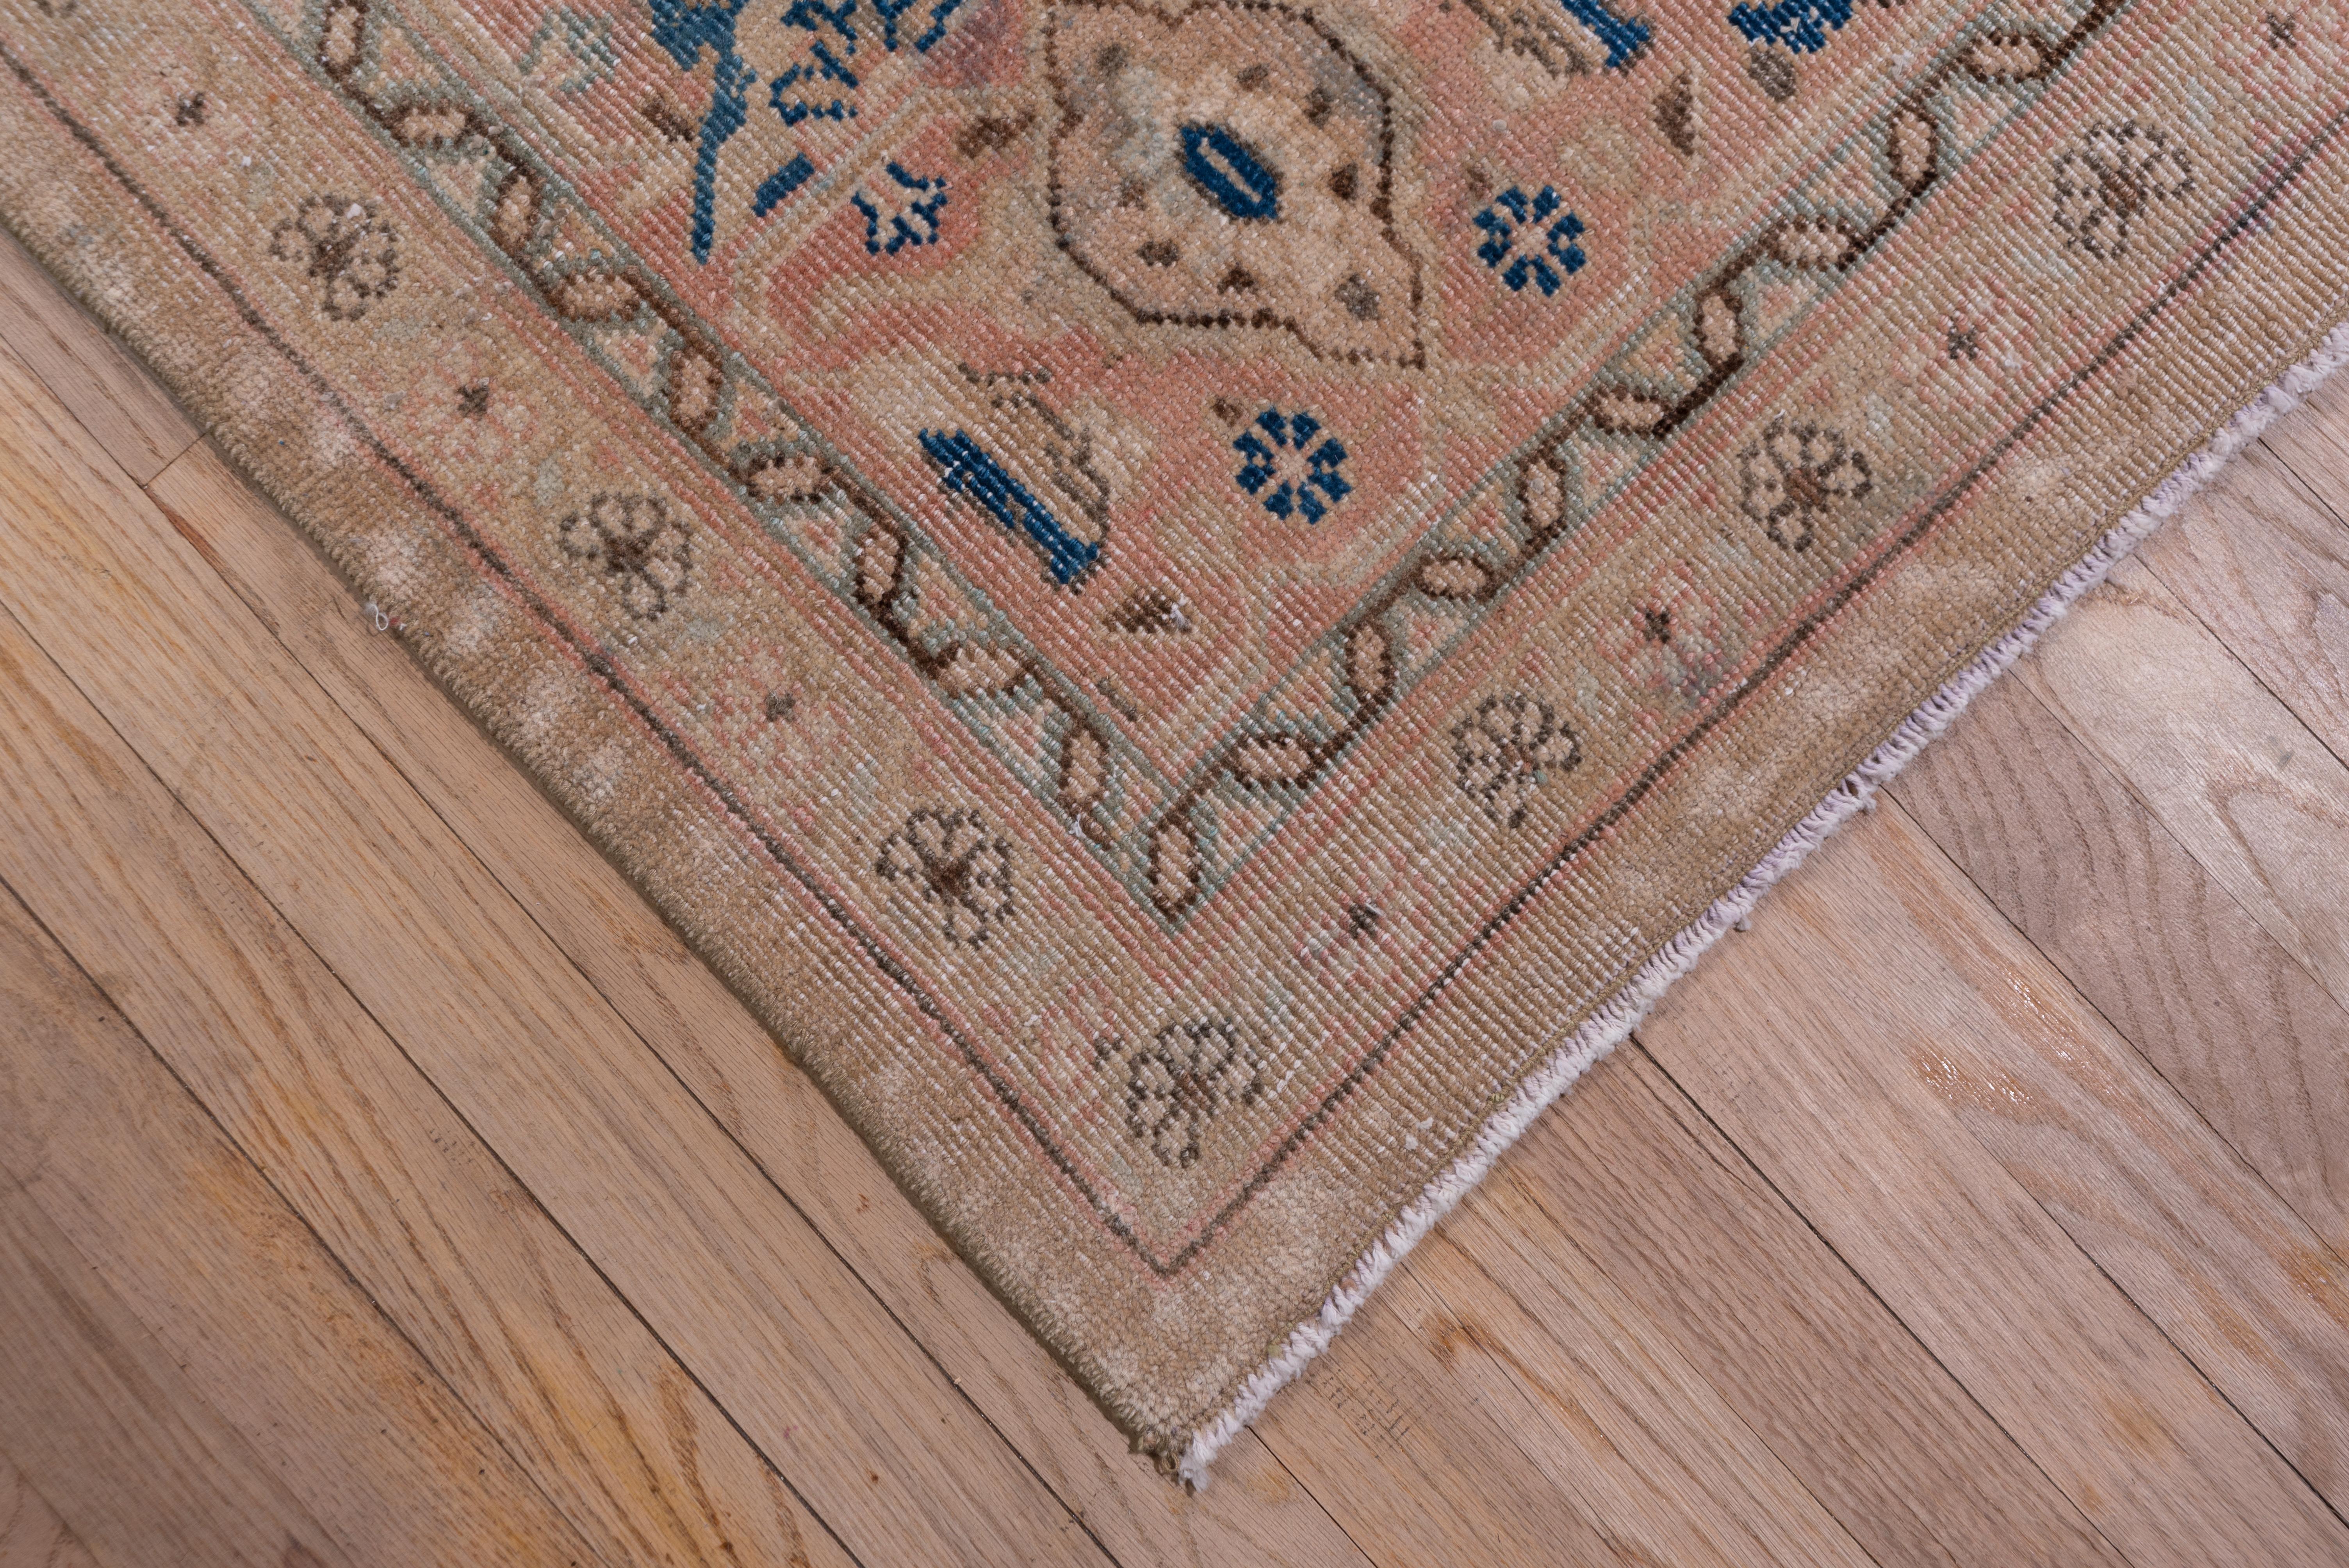 The light buff field of this iconic west Persian rustic carpet supports an allover Herati design within stepped Herati corners and an framing buff border with simple turtle escutcheons.